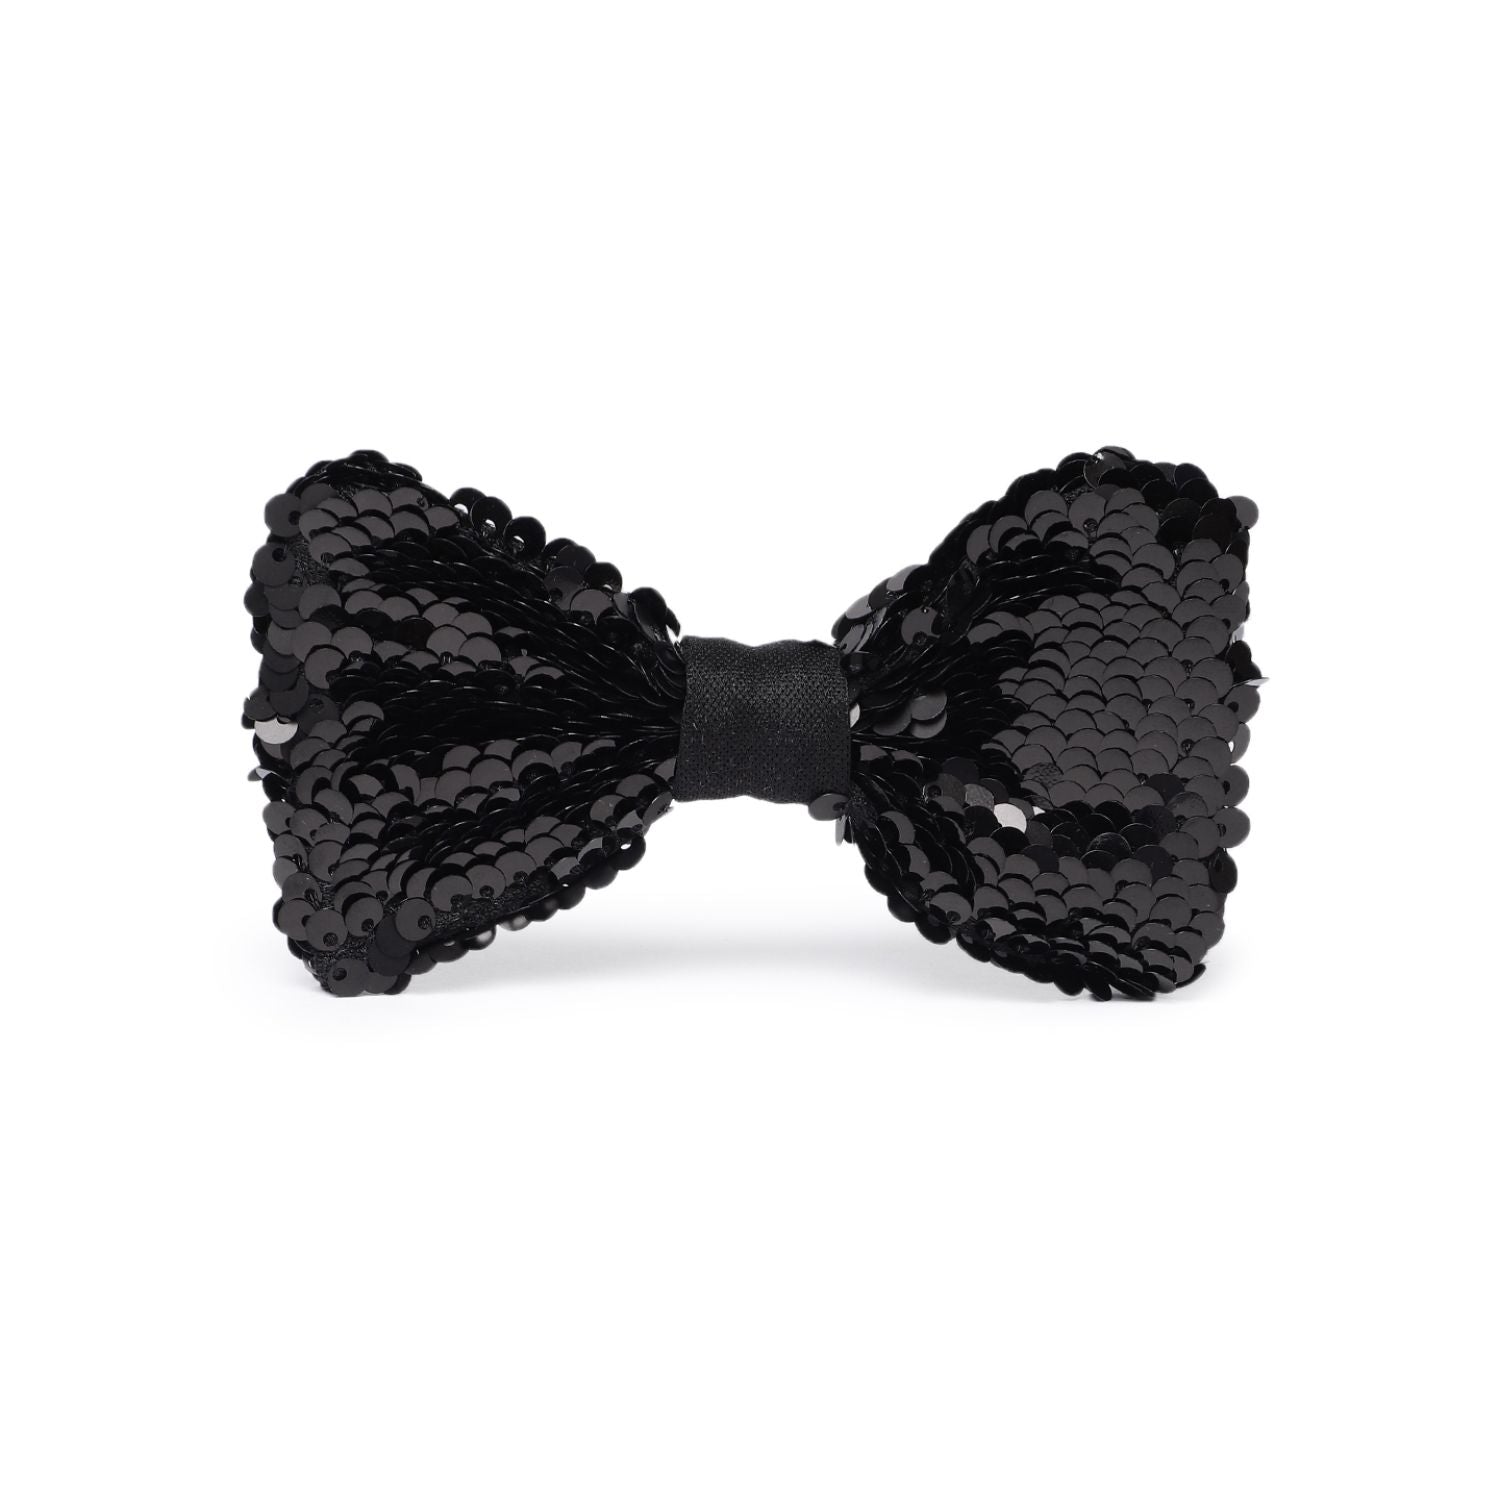 Buy 1 pc Black Floral Bow Hair Clips for Women Silk Hair Barrettes Metal  Hair Pins for Party Wedding Daily Wear Black Hair Bow Clip Pack of 1 Pc  at eChoice India